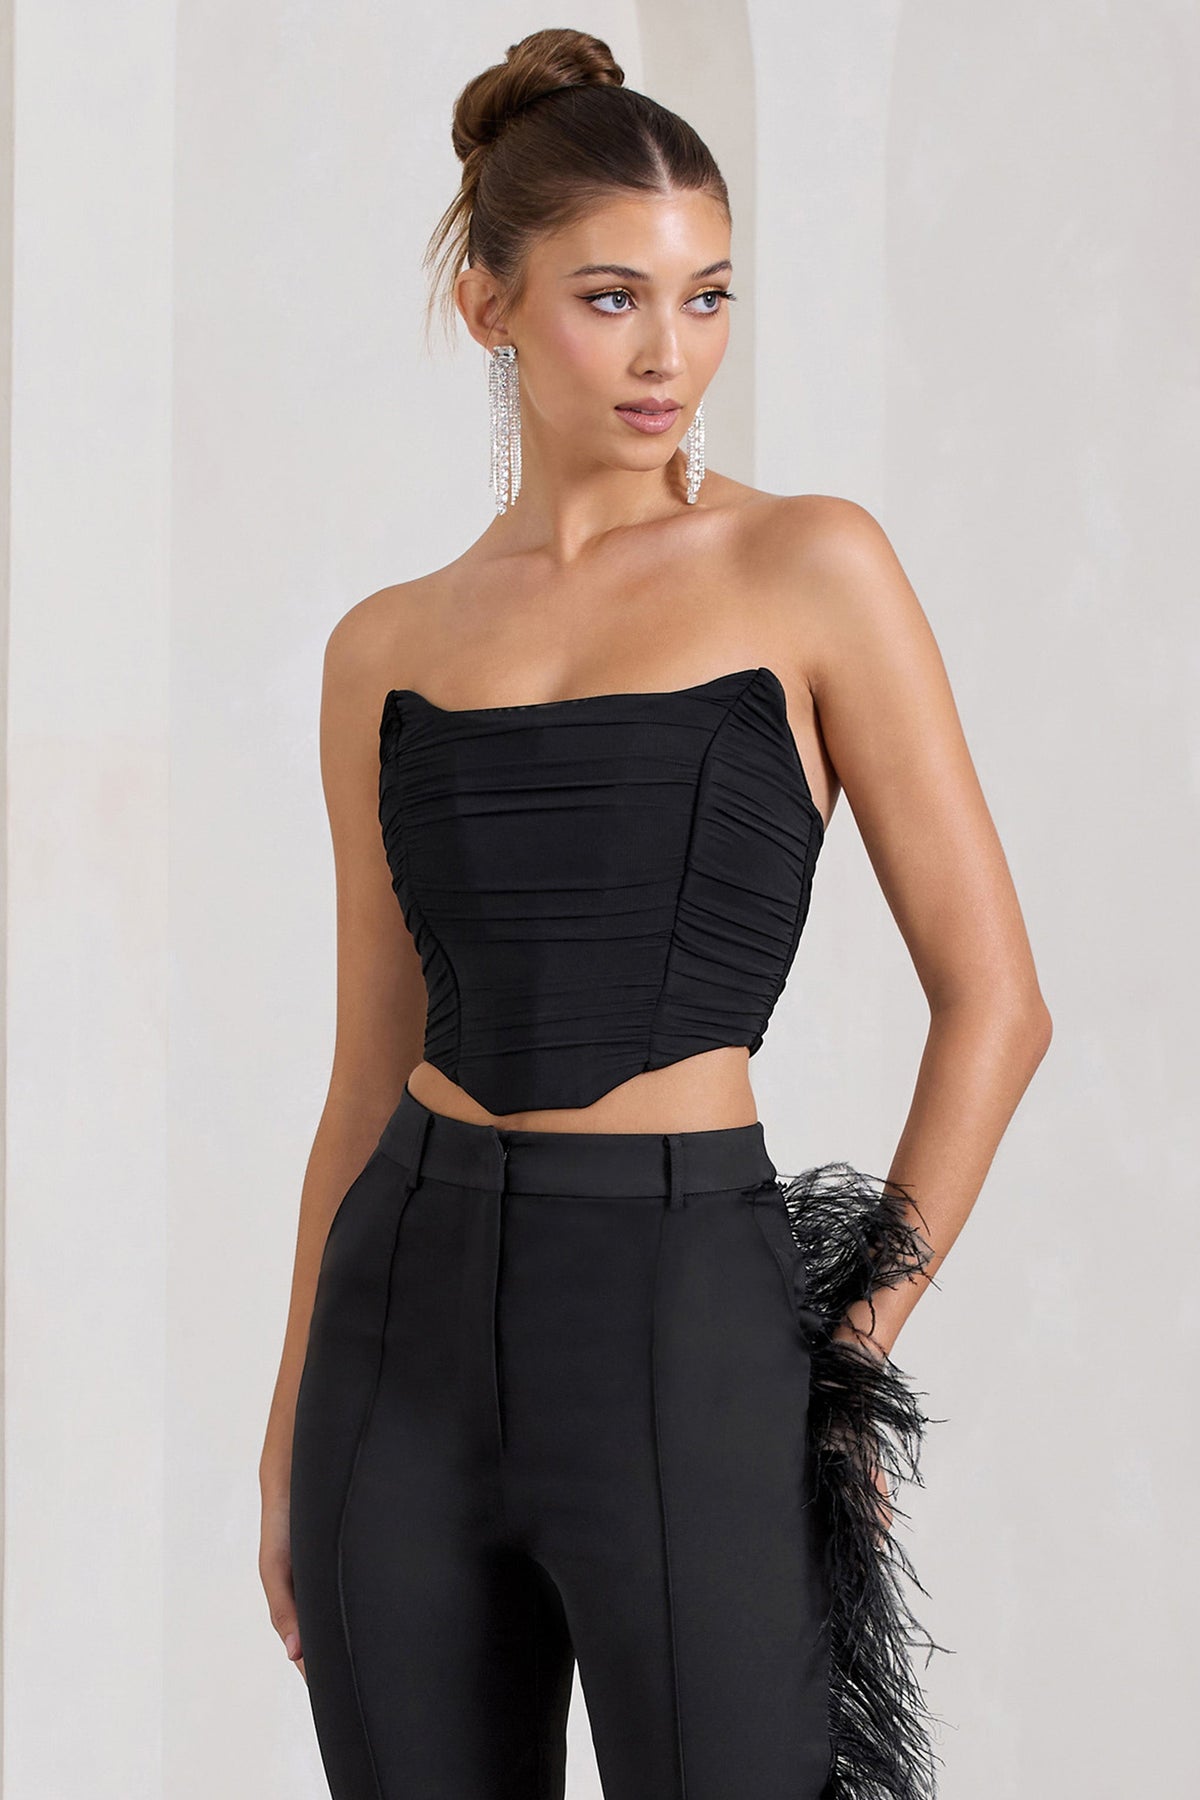 https://www.clubllondon.ie/cdn/shop/files/WB_HR_CL127281002-ObsessedBlackBandeauMeshCorsetStyleCropTop_CL125641002-CountMeInBlackTailoredFeatherTrimTrousers2copy_1200x.jpg?v=1697556112